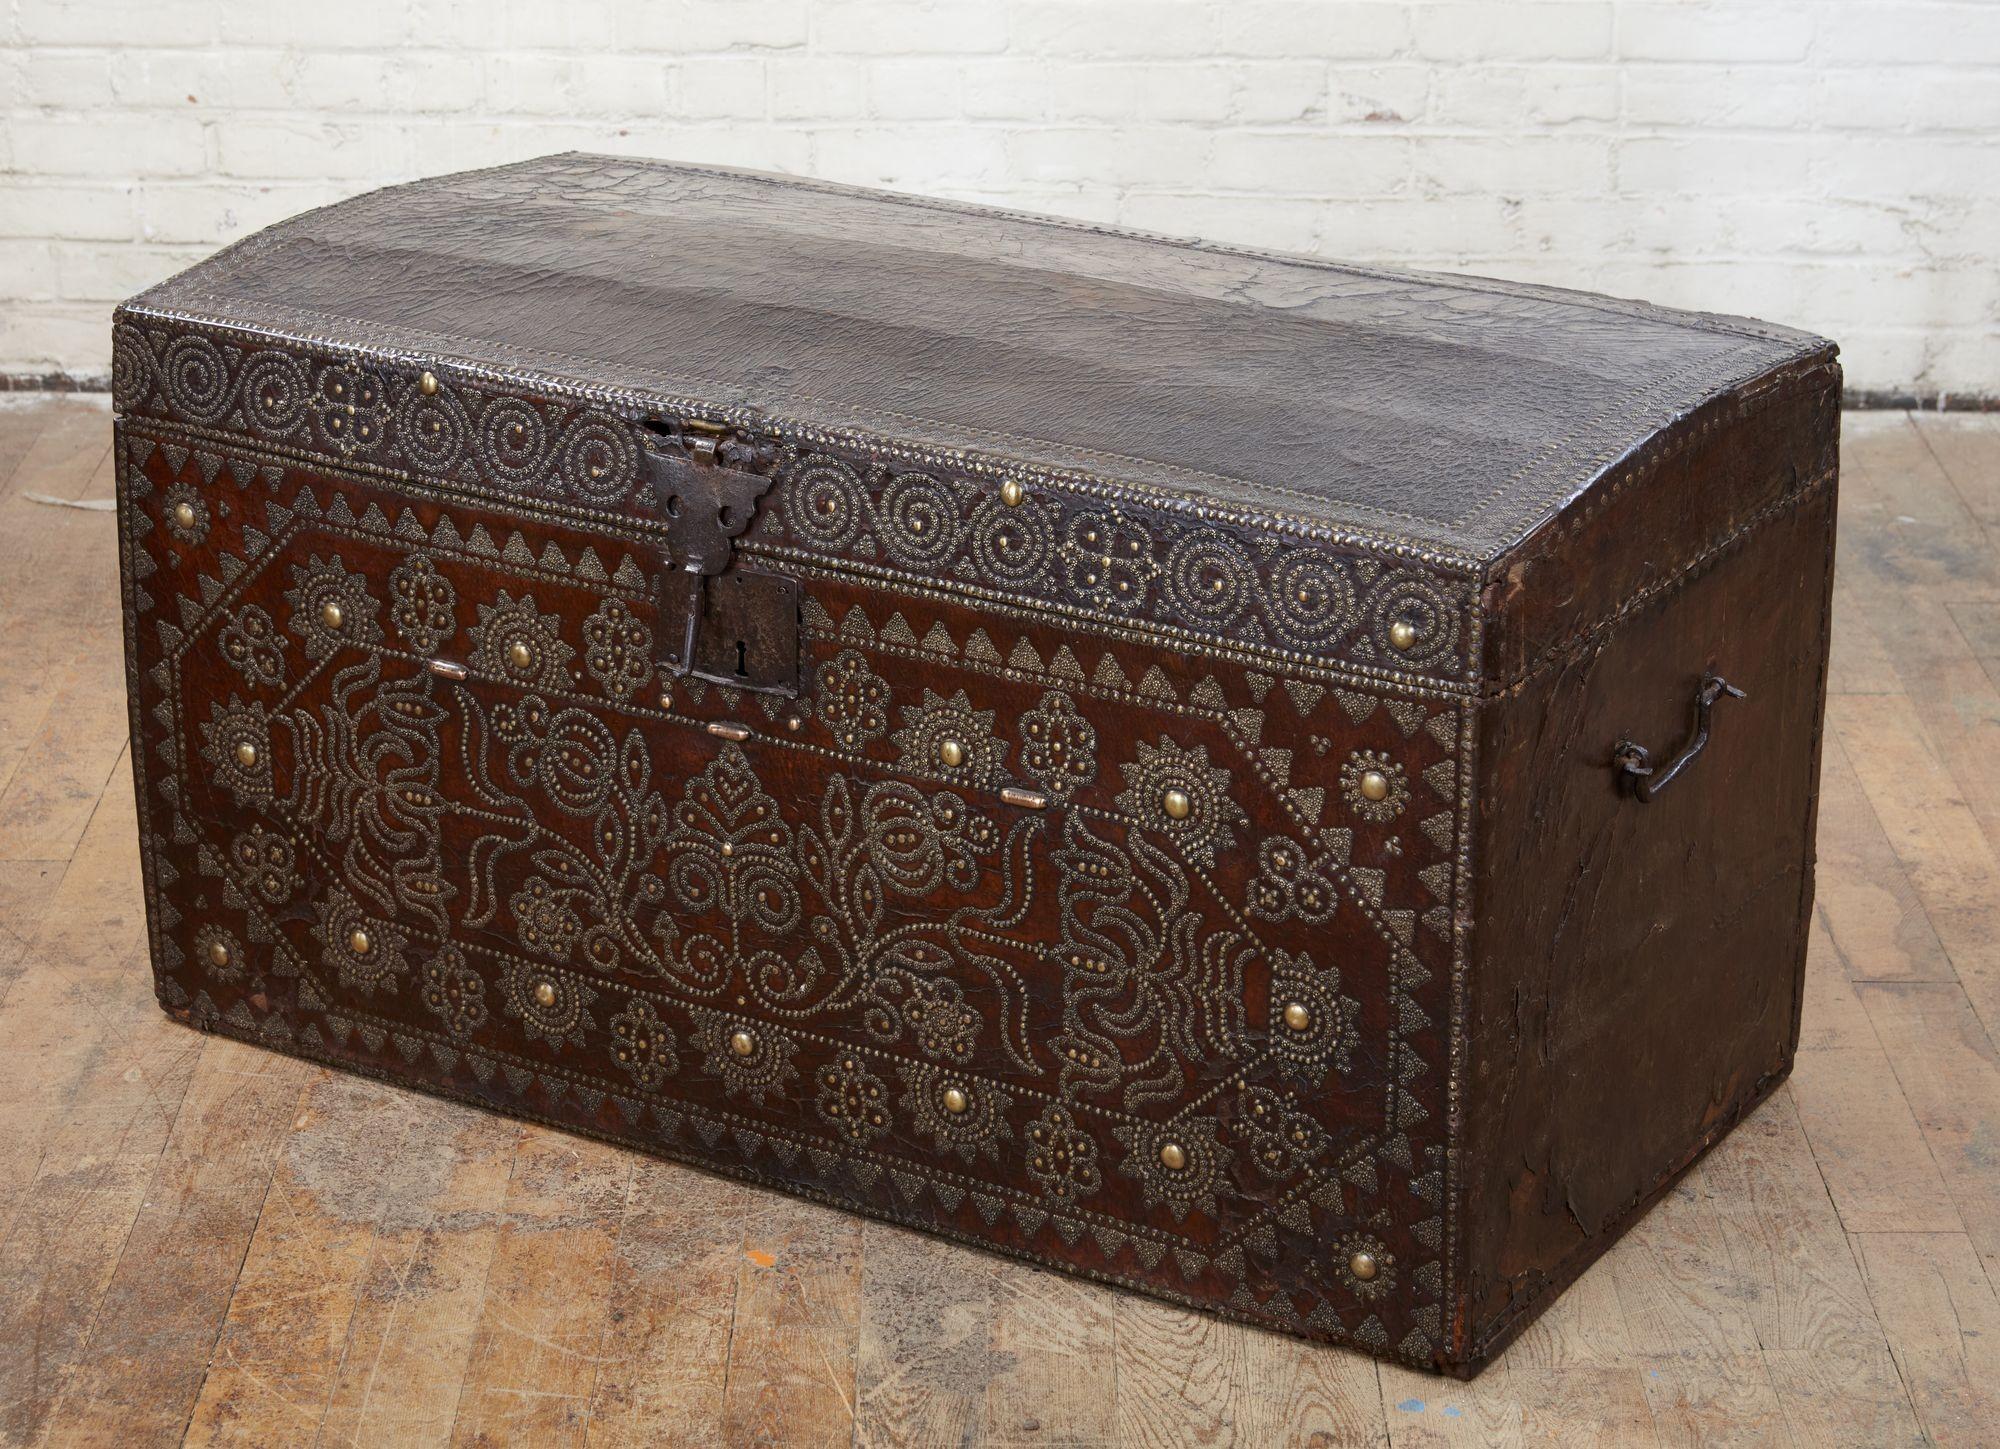 Very fine early 18th century leather travel chest or trunk in beautiful brass and iron studded Spanish leather, having elaborate geometric floral design, the slightly domed top with thin border over profusely studded front with arabesque border,